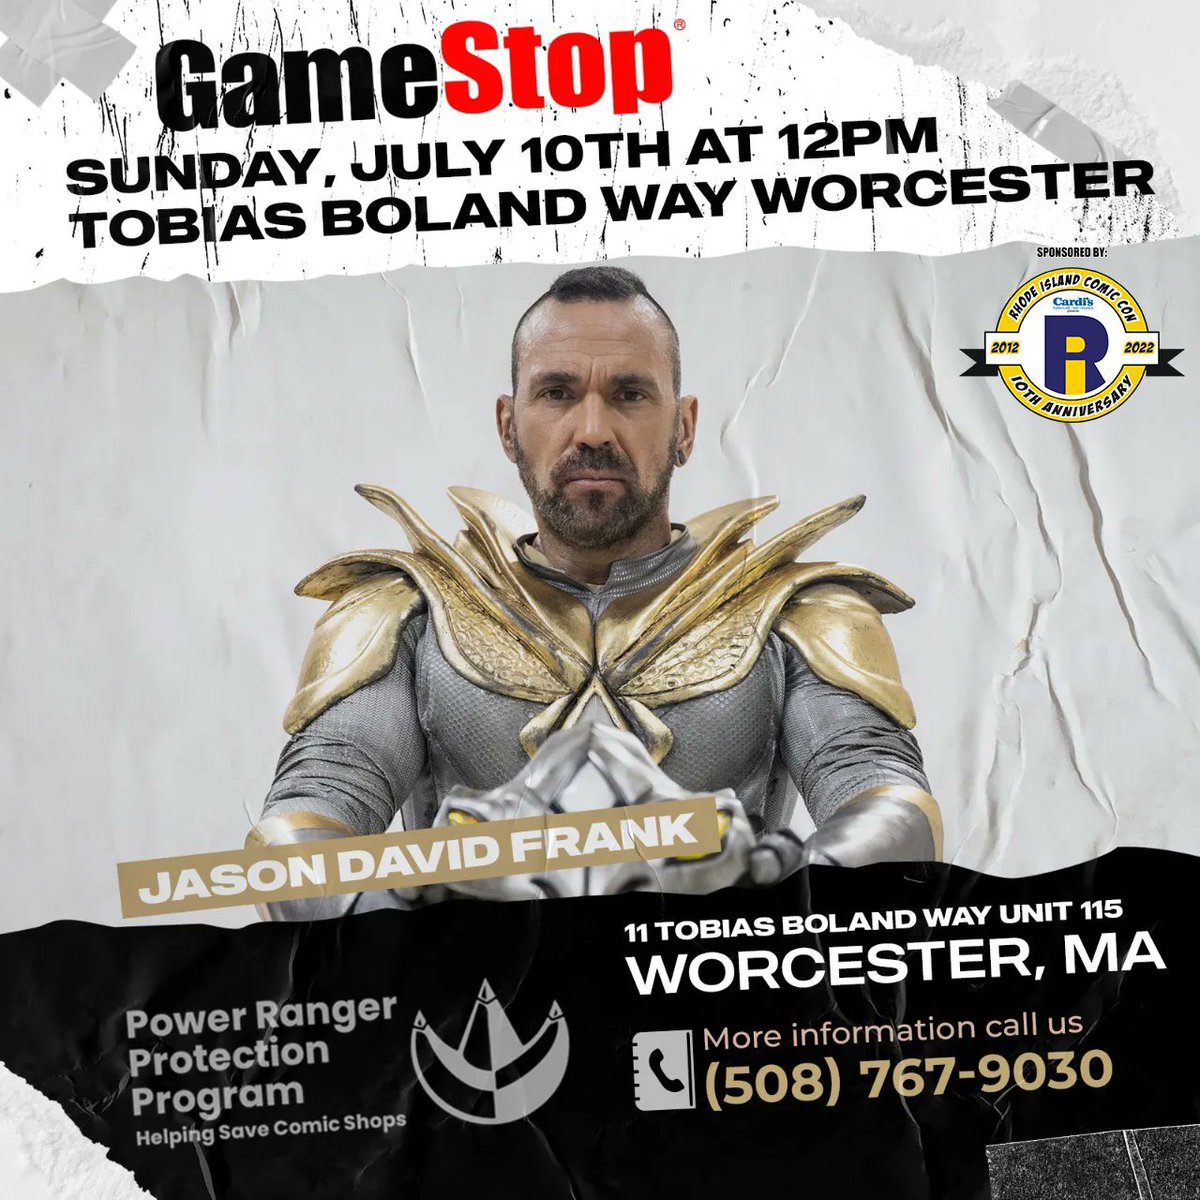 Today's the MA last stop on the #JDFPPP tour, at the @gamestop in Worcester at noon. Meet @jdfffn, our favorite Green Power Ranger. Call the store for your FREE ticket.

This appearance is part of the Power Ranger Protection Program & is sponsored by @ricomiccon.